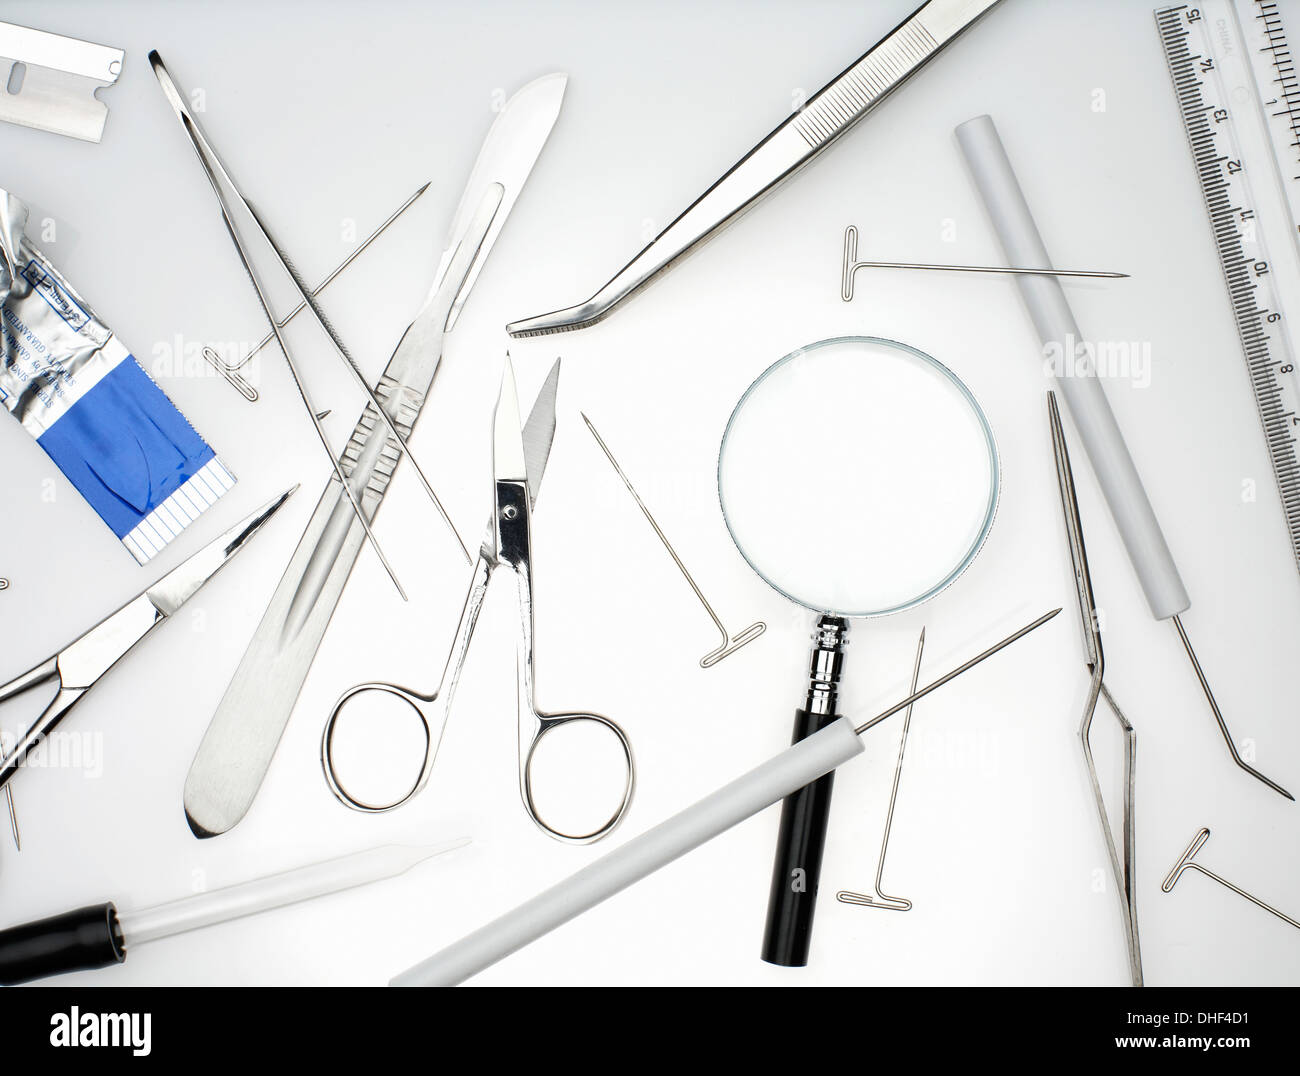 Still life with objects to collect forensic evidence Stock Photo